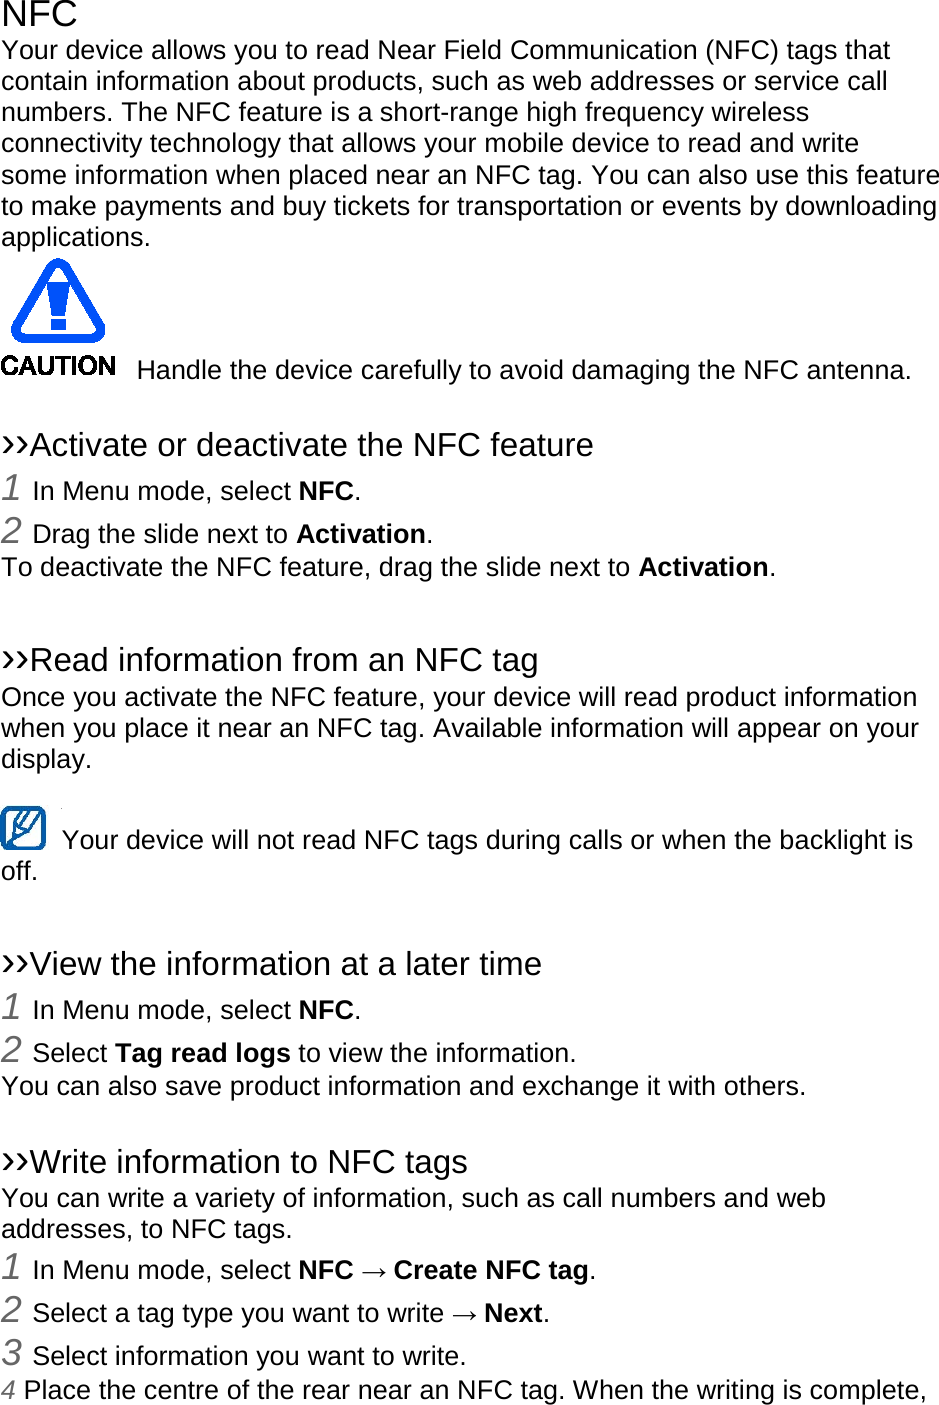 NFC Your device allows you to read Near Field Communication (NFC) tags that contain information about products, such as web addresses or service call numbers. The NFC feature is a short-range high frequency wireless connectivity technology that allows your mobile device to read and write some information when placed near an NFC tag. You can also use this feature to make payments and buy tickets for transportation or events by downloading applications.    Handle the device carefully to avoid damaging the NFC antenna.  ››Activate or deactivate the NFC feature 1 In Menu mode, select NFC. 2 Drag the slide next to Activation. To deactivate the NFC feature, drag the slide next to Activation.  ››Read information from an NFC tag Once you activate the NFC feature, your device will read product information when you place it near an NFC tag. Available information will appear on your display.  Your device will not read NFC tags during calls or when the backlight is   off.  ››View the information at a later time 1 In Menu mode, select NFC. 2 Select Tag read logs to view the information. You can also save product information and exchange it with others.  ››Write information to NFC tags   You can write a variety of information, such as call numbers and web addresses, to NFC tags. 1 In Menu mode, select NFC → Create NFC tag. 2 Select a tag type you want to write → Next. 3 Select information you want to write. 4 Place the centre of the rear near an NFC tag. When the writing is complete, 